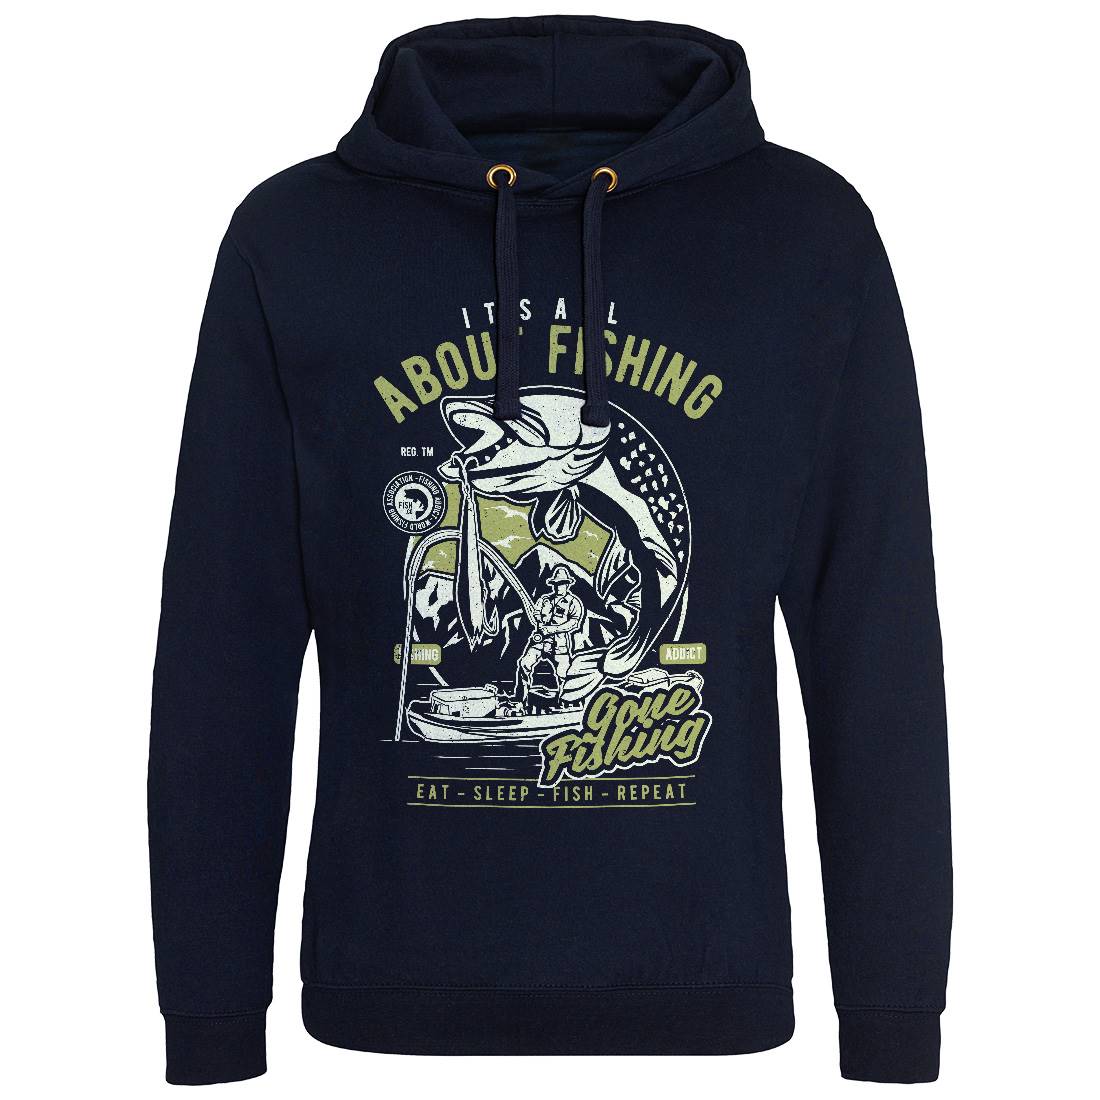 All About Mens Hoodie Without Pocket Fishing A604